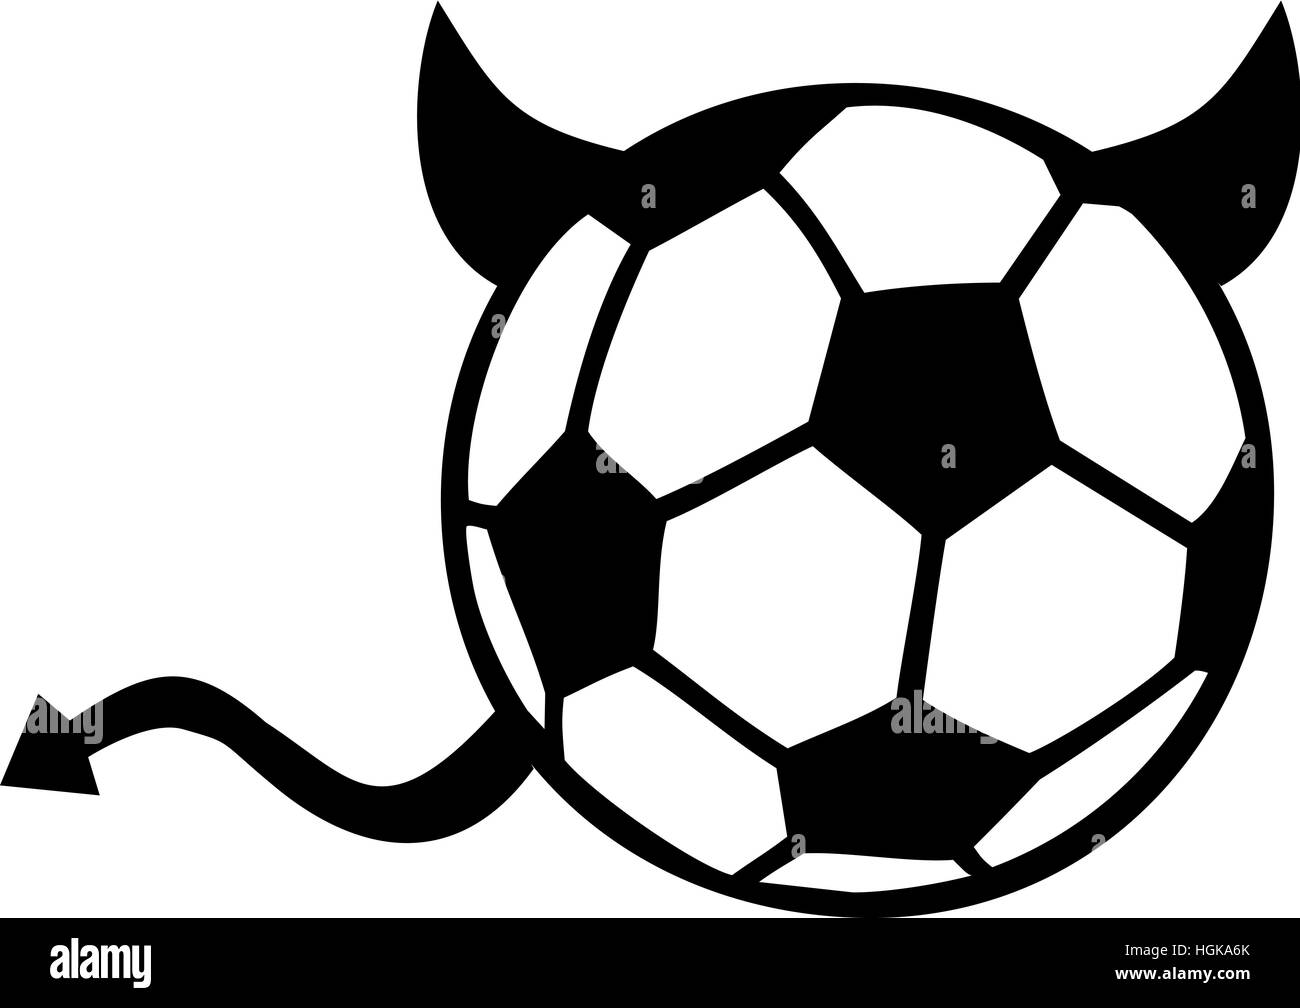 Soccer ball with devil horns and tail Stock Photo